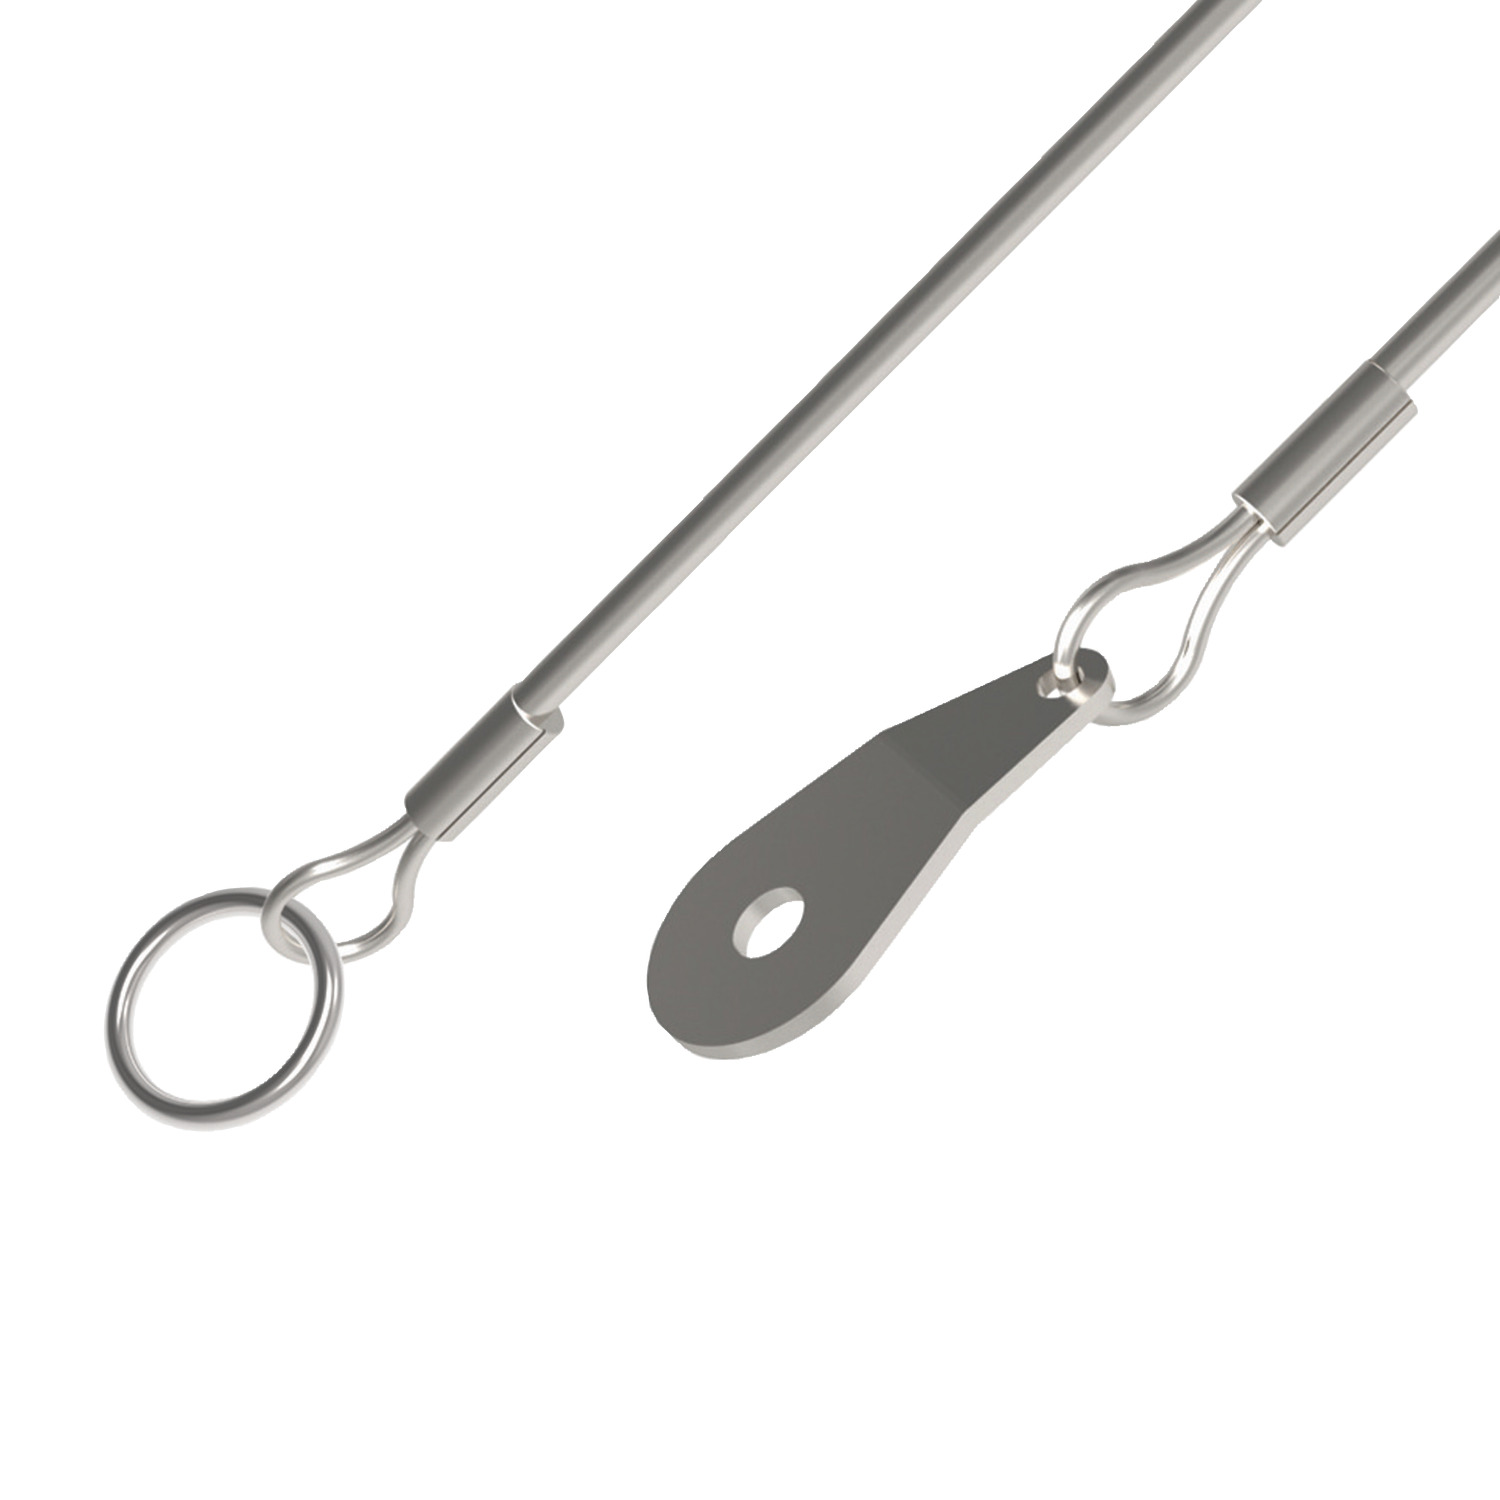 Lanyard - Ring to Teardrop Tab Stainless steel split ring to rectangle tab lanyard for use in securing components to assemblies. Conforms to military spec MIL-DTL-83420.